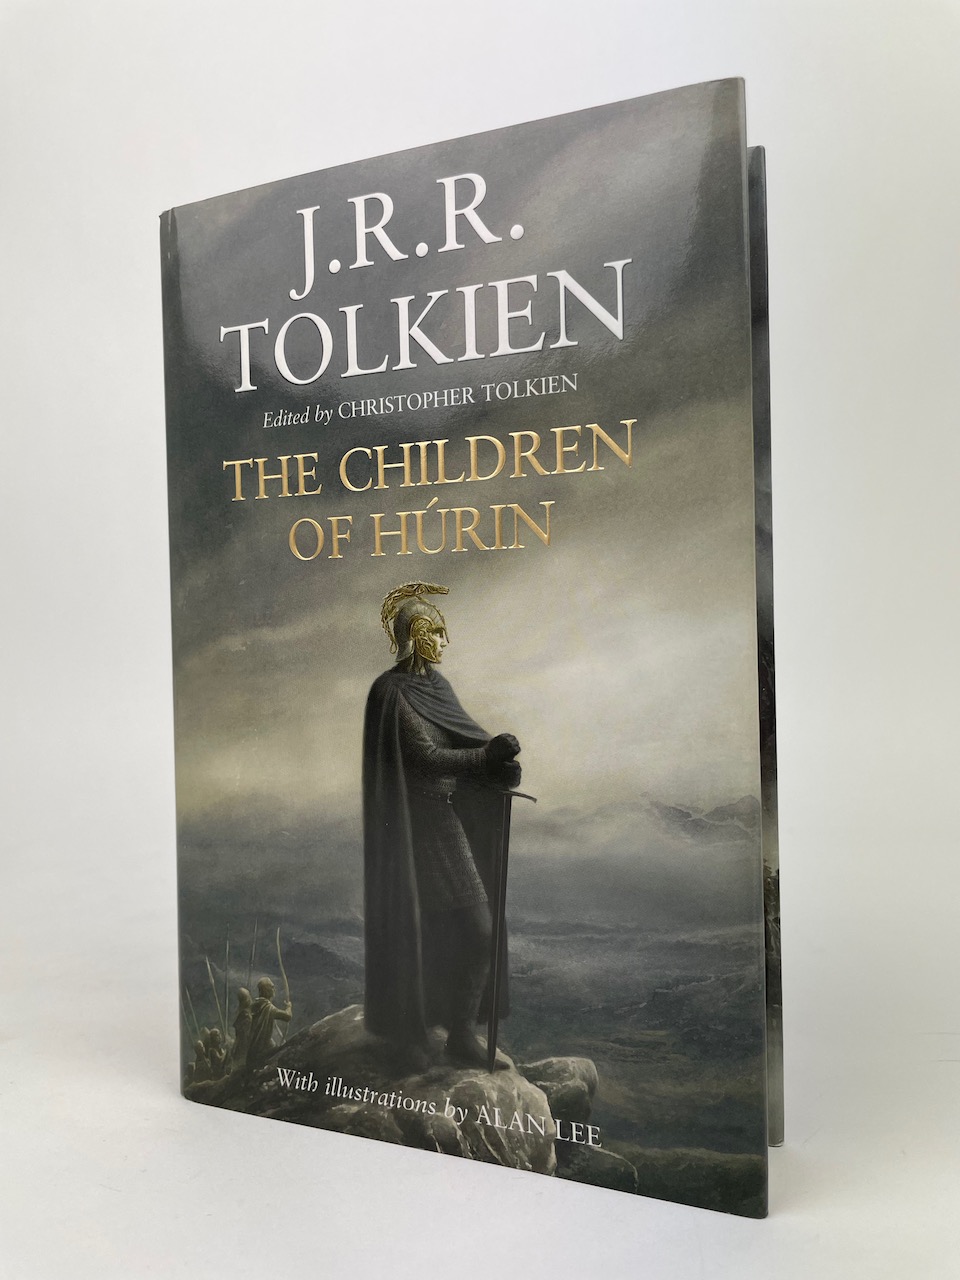 UK 1st Edition of The Children of Hurin, signed by Christopher Tolkien, Allan Lee and Bernard Hill 1